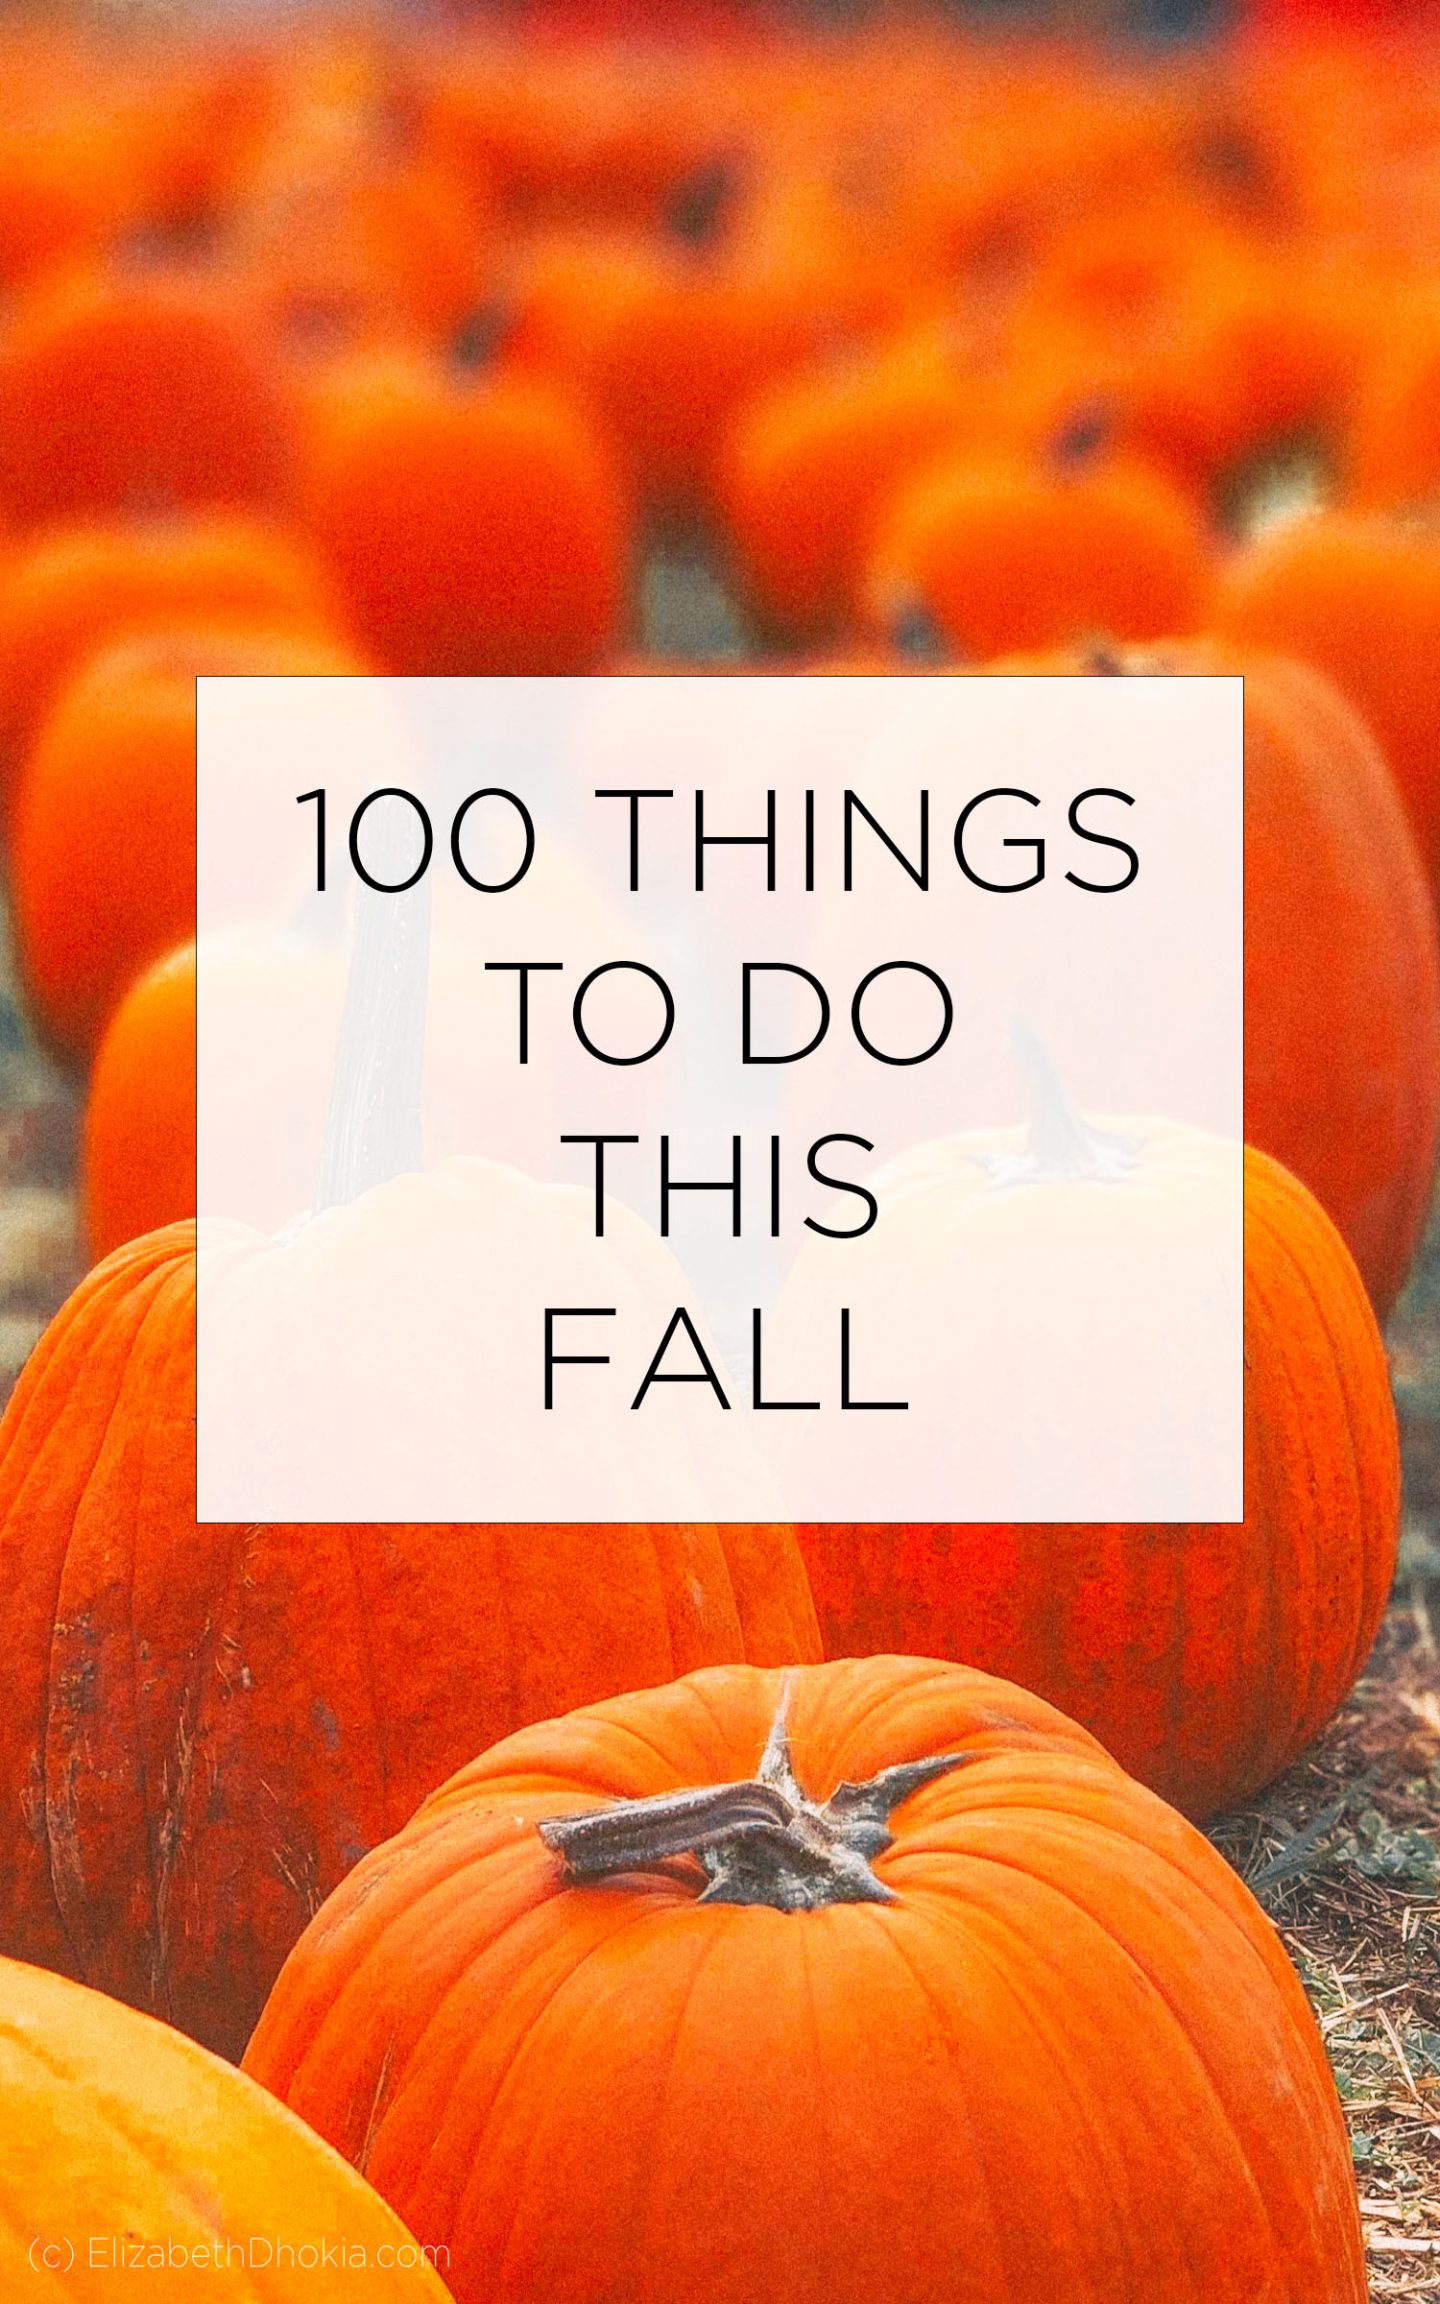 100 Things To Do This Fall List